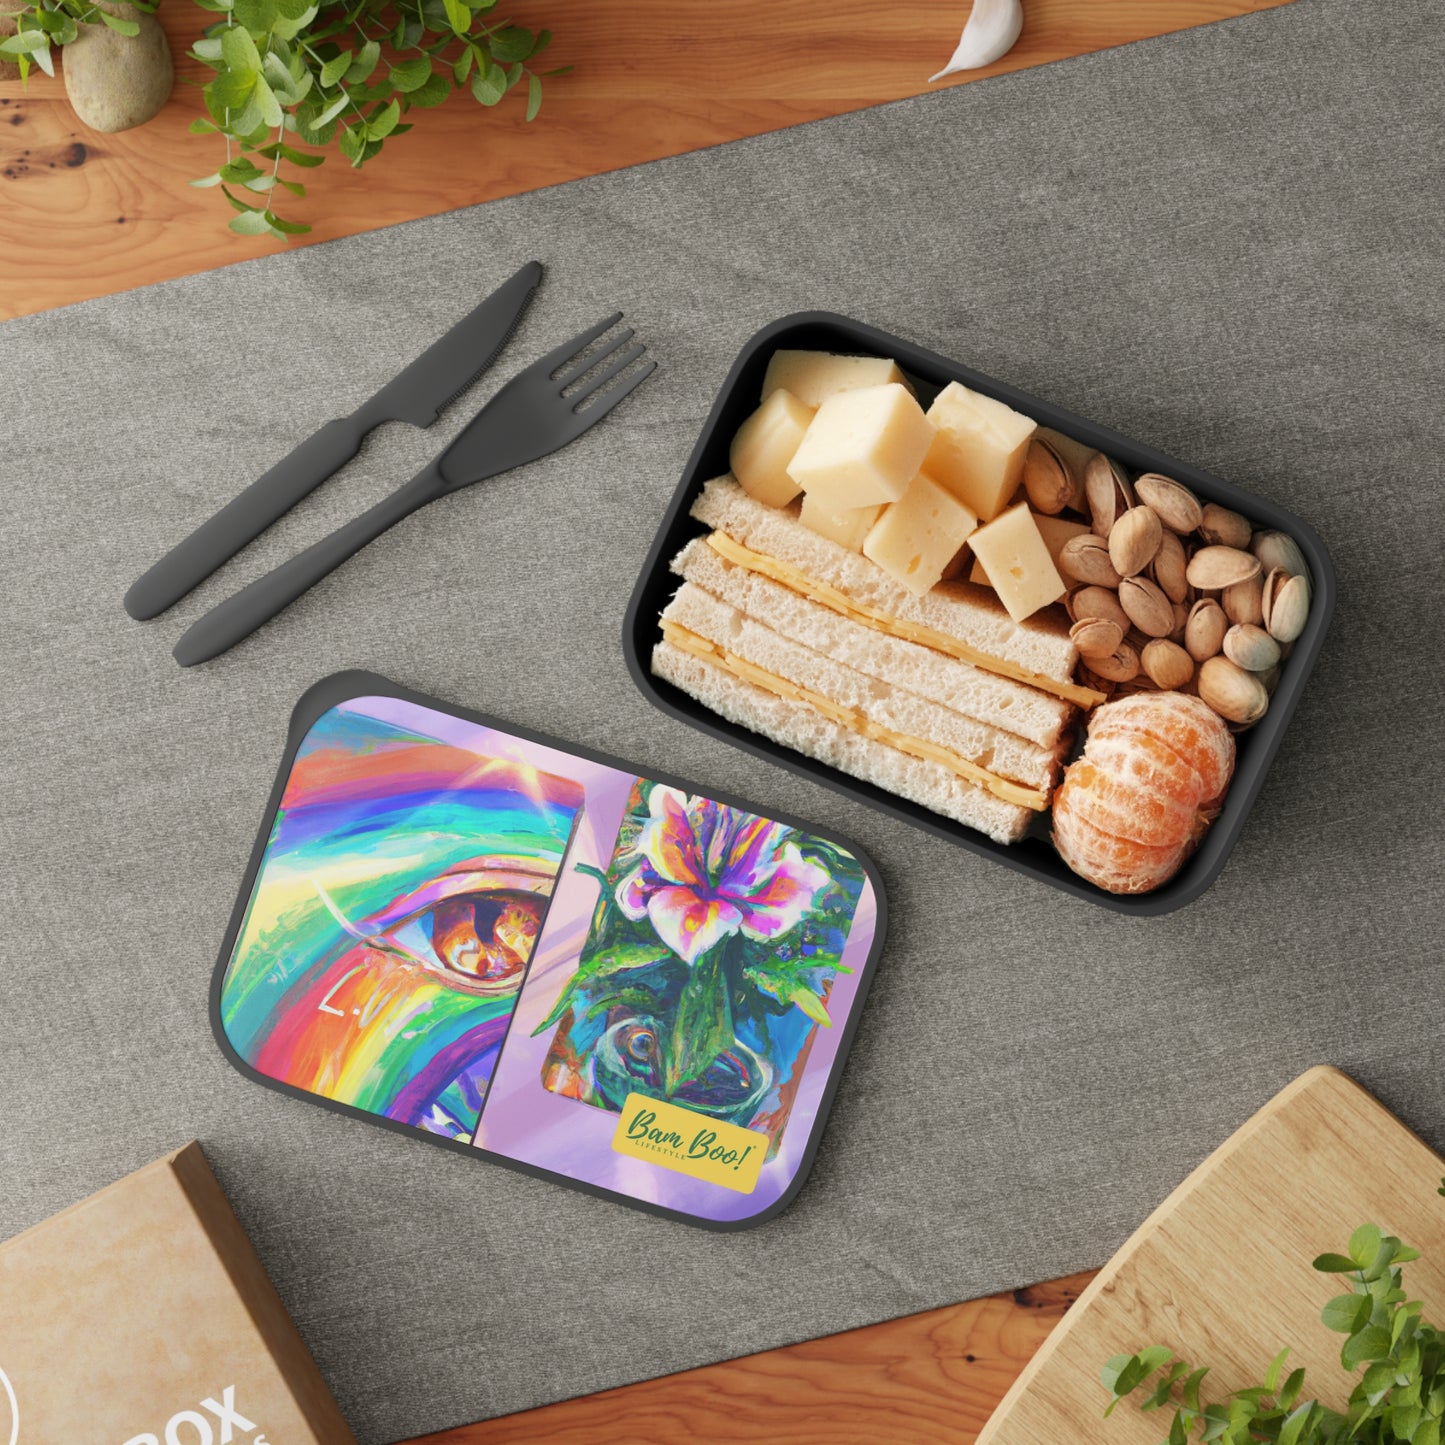 "Coloring Your World: Crafting Custom Collages with Meaning" - Bam Boo! Lifestyle Eco-friendly PLA Bento Box with Band and Utensils